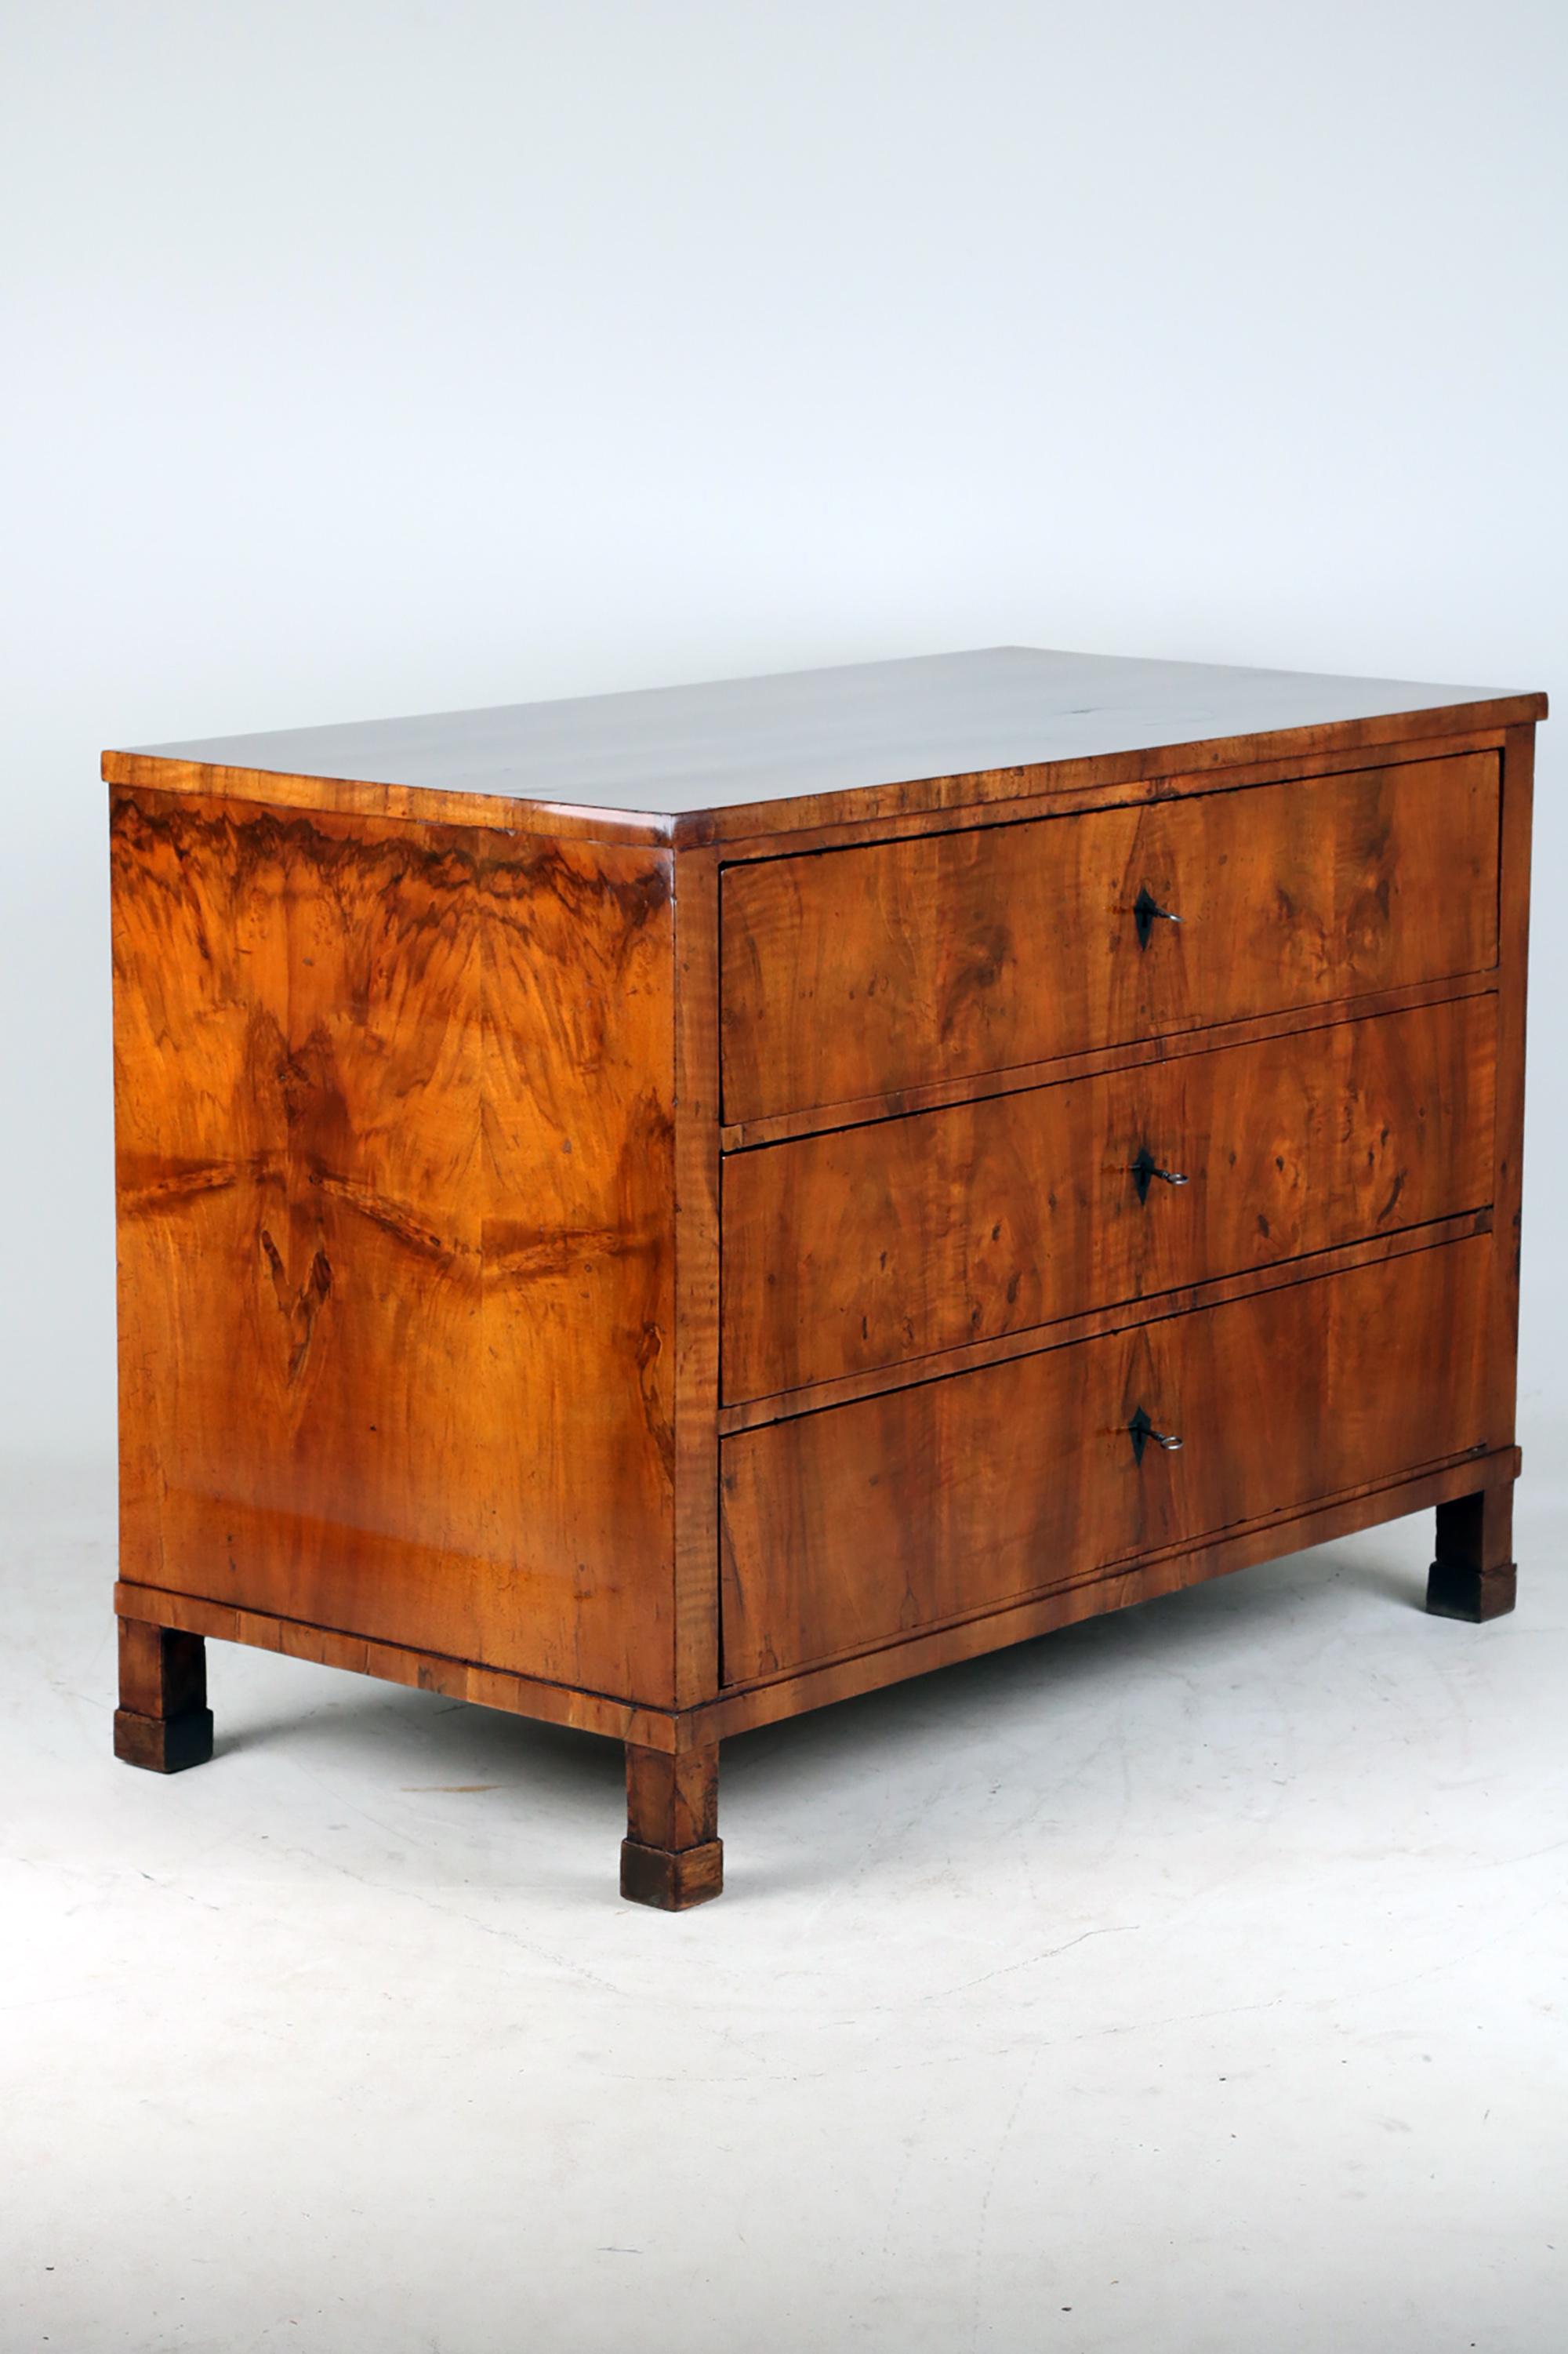 Polished Early 19th Century Biedermeier Chest of drawers, Walnut  For Sale